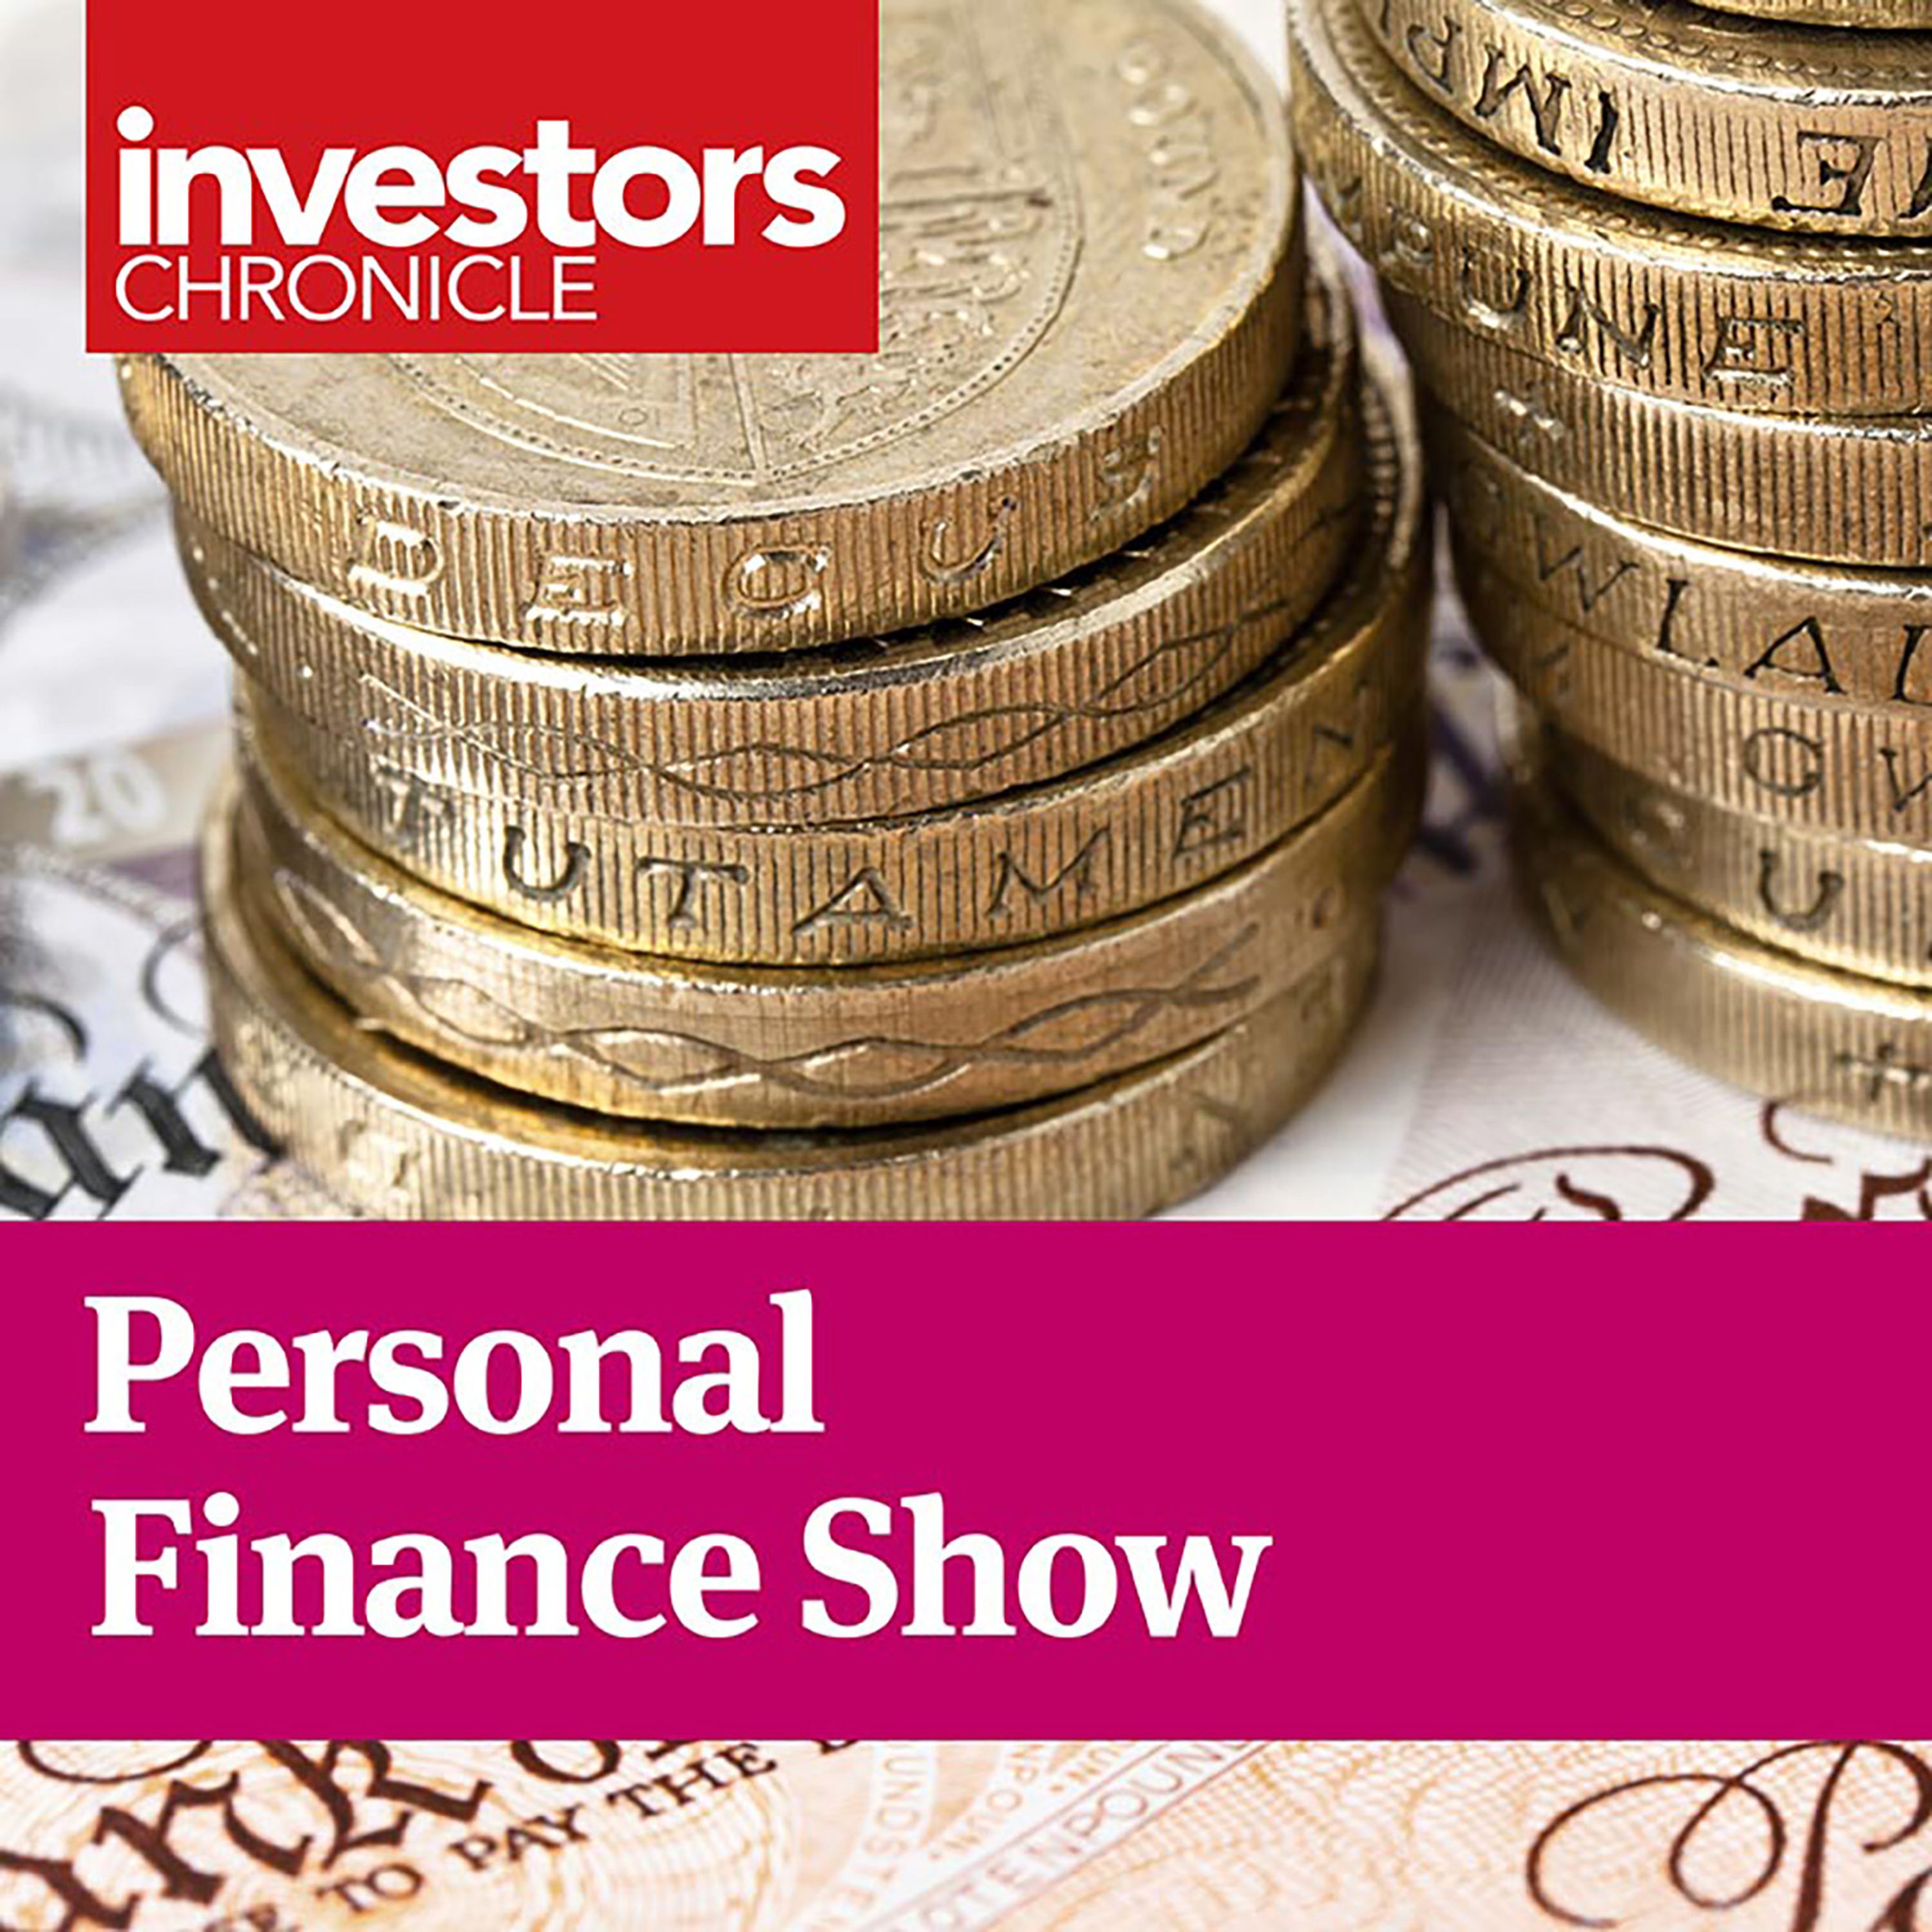 Personal Finance Show: Emerging opportunities and embracing UK uncertainty